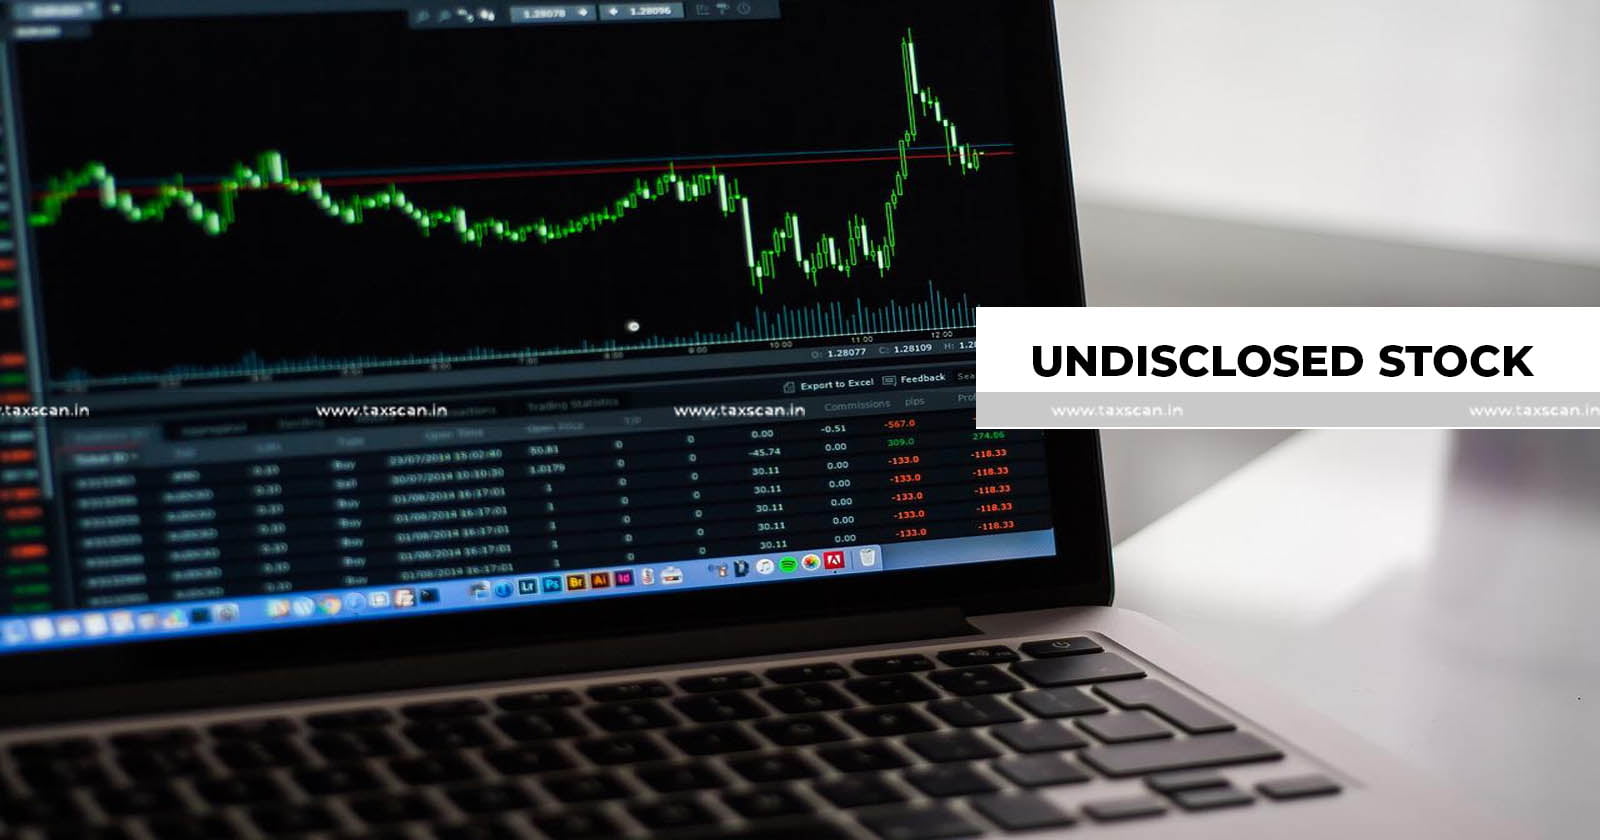 Undisclosed - Stock - Incomplete - Tally - Data - ITAT - TAXSCAN